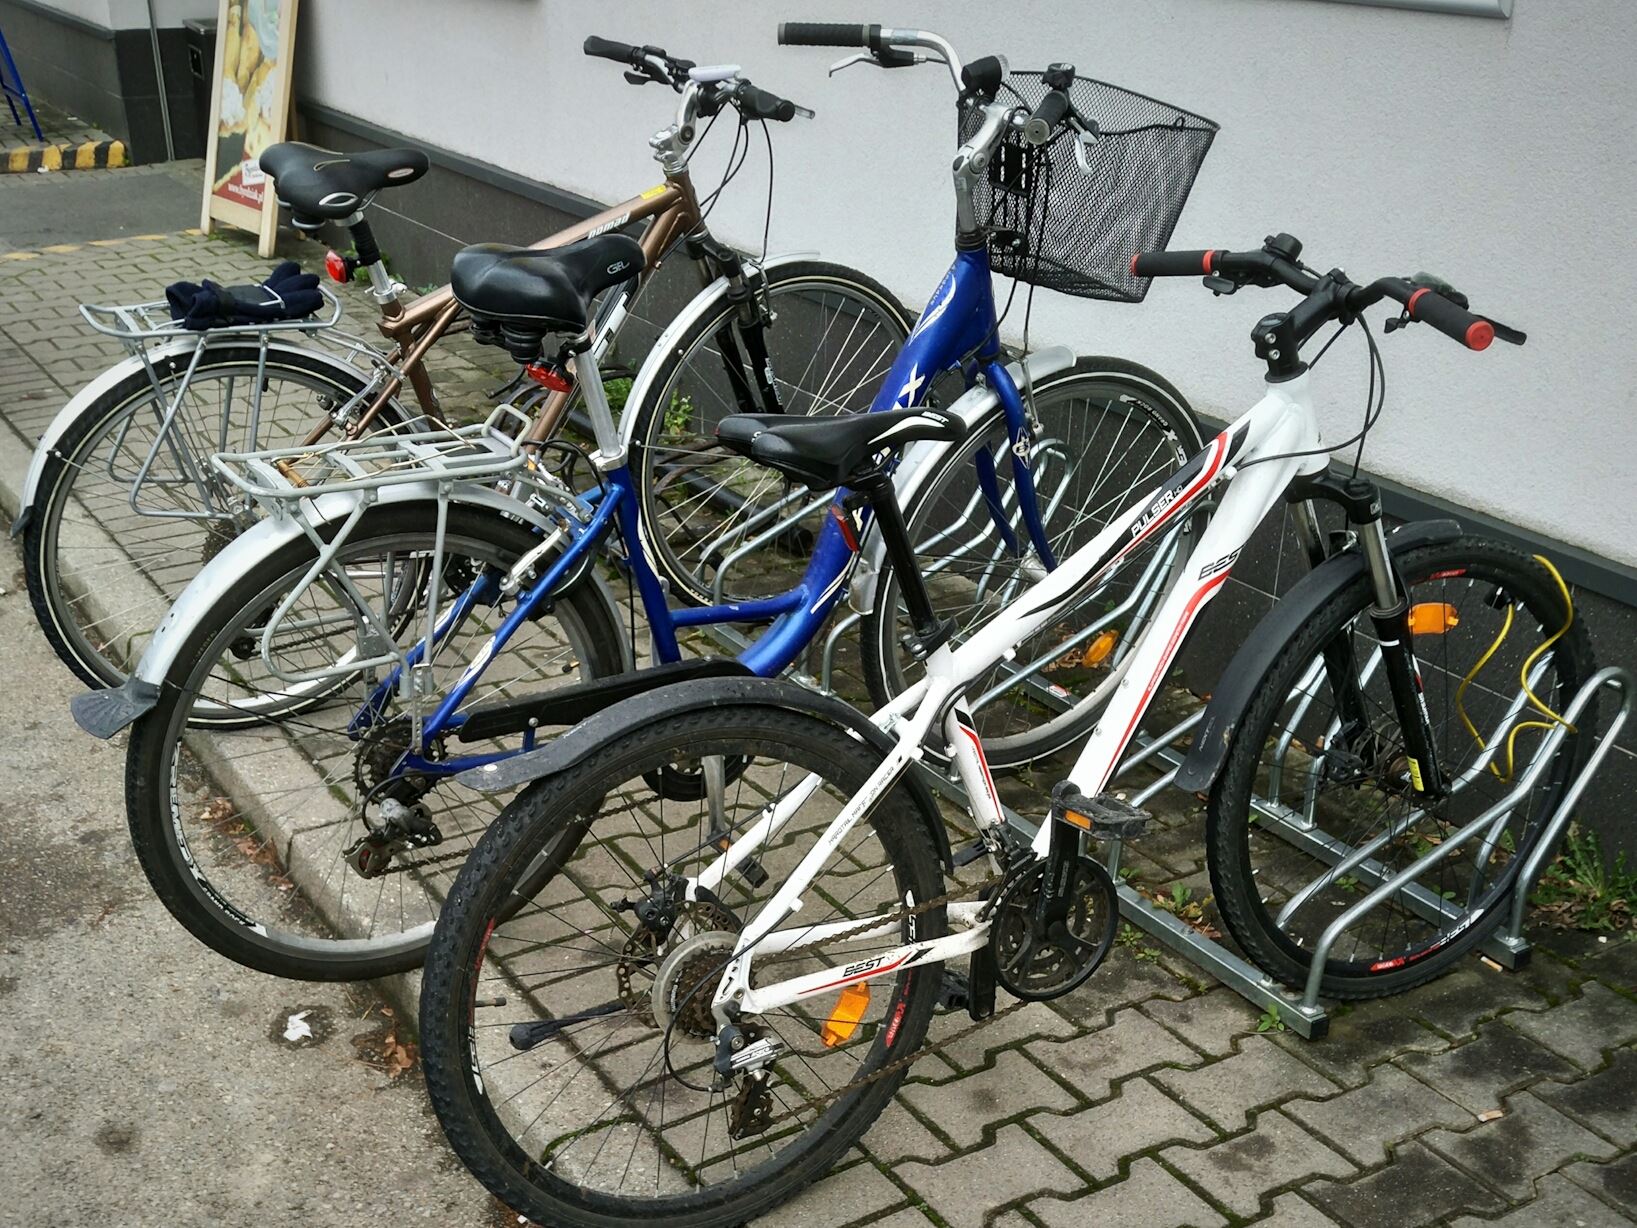 Bikes parked in a bike rack